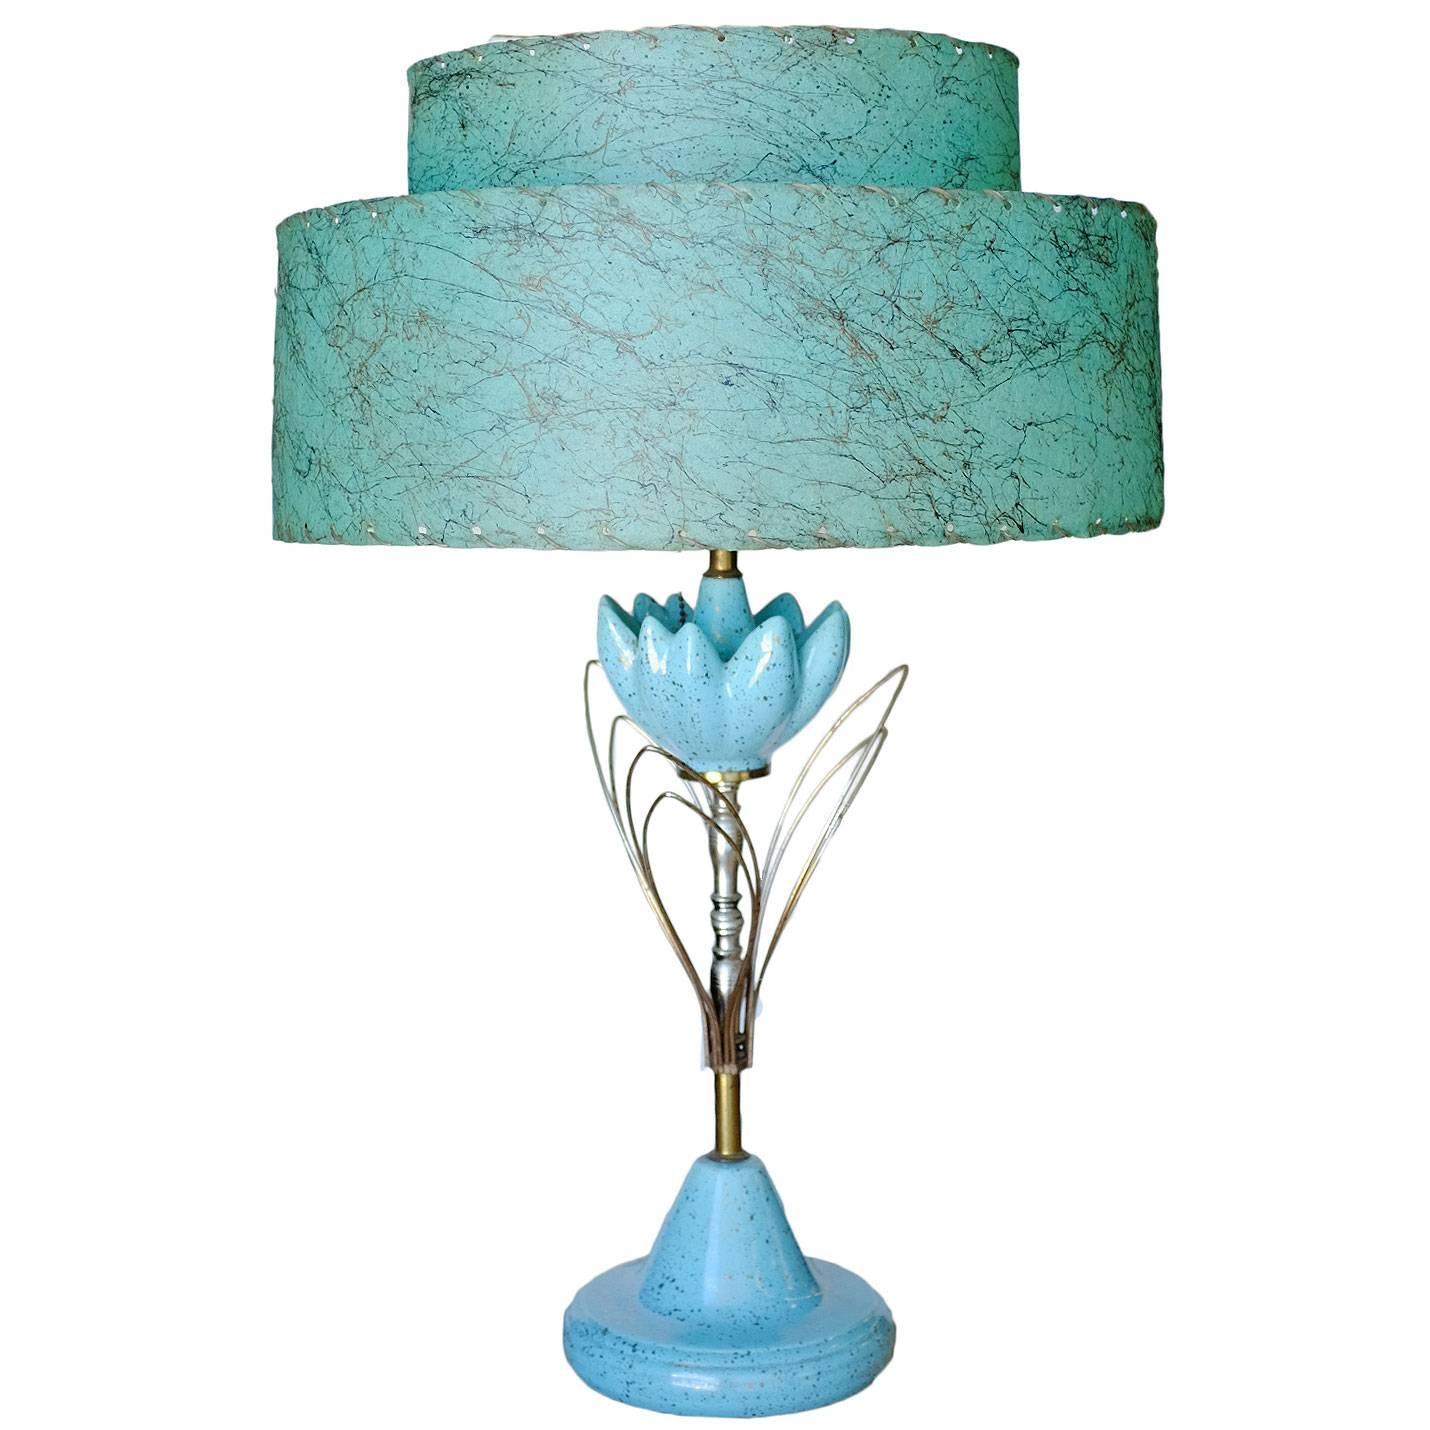 Ceramic Sculptural Lotus Table lamp with Whipstitch Shade